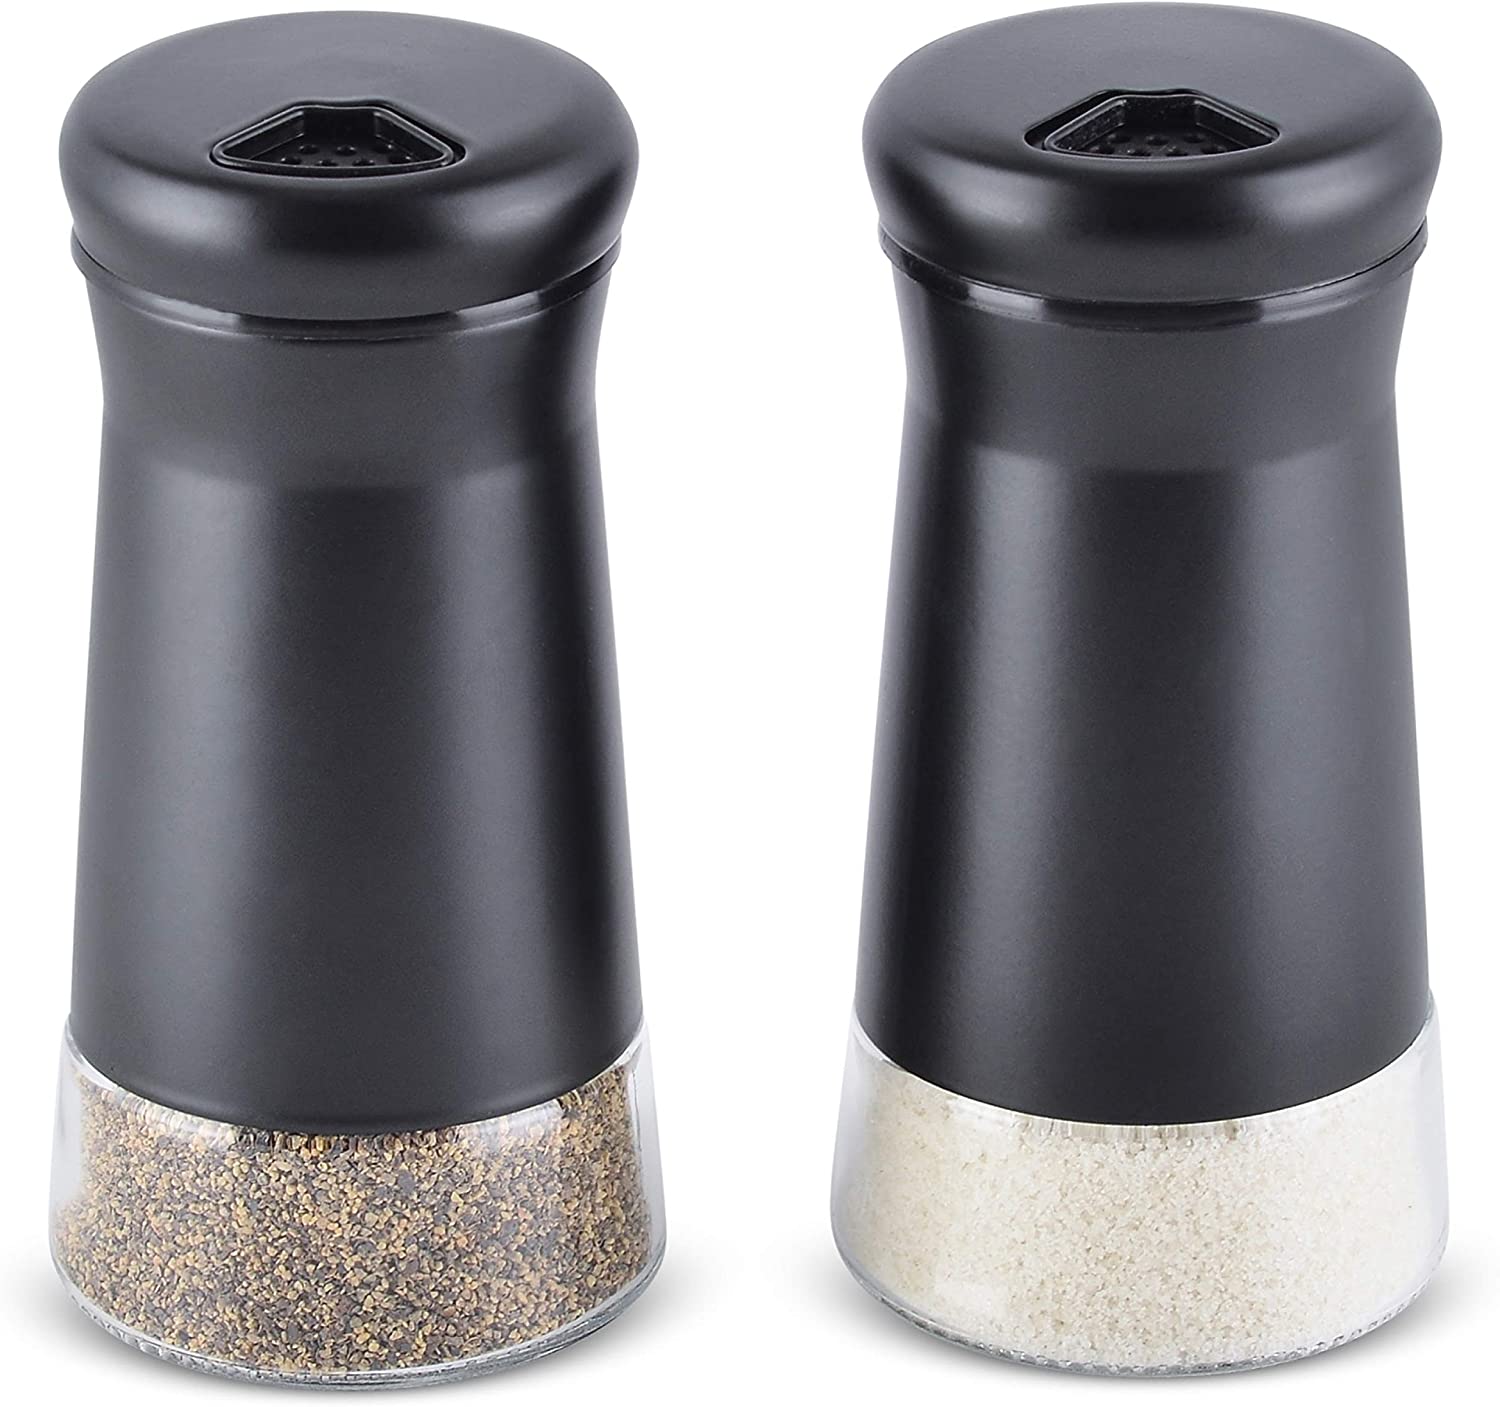 Home EC Salt and Pepper Shaker Set of 2 with Adjustable Pour Settings (black)